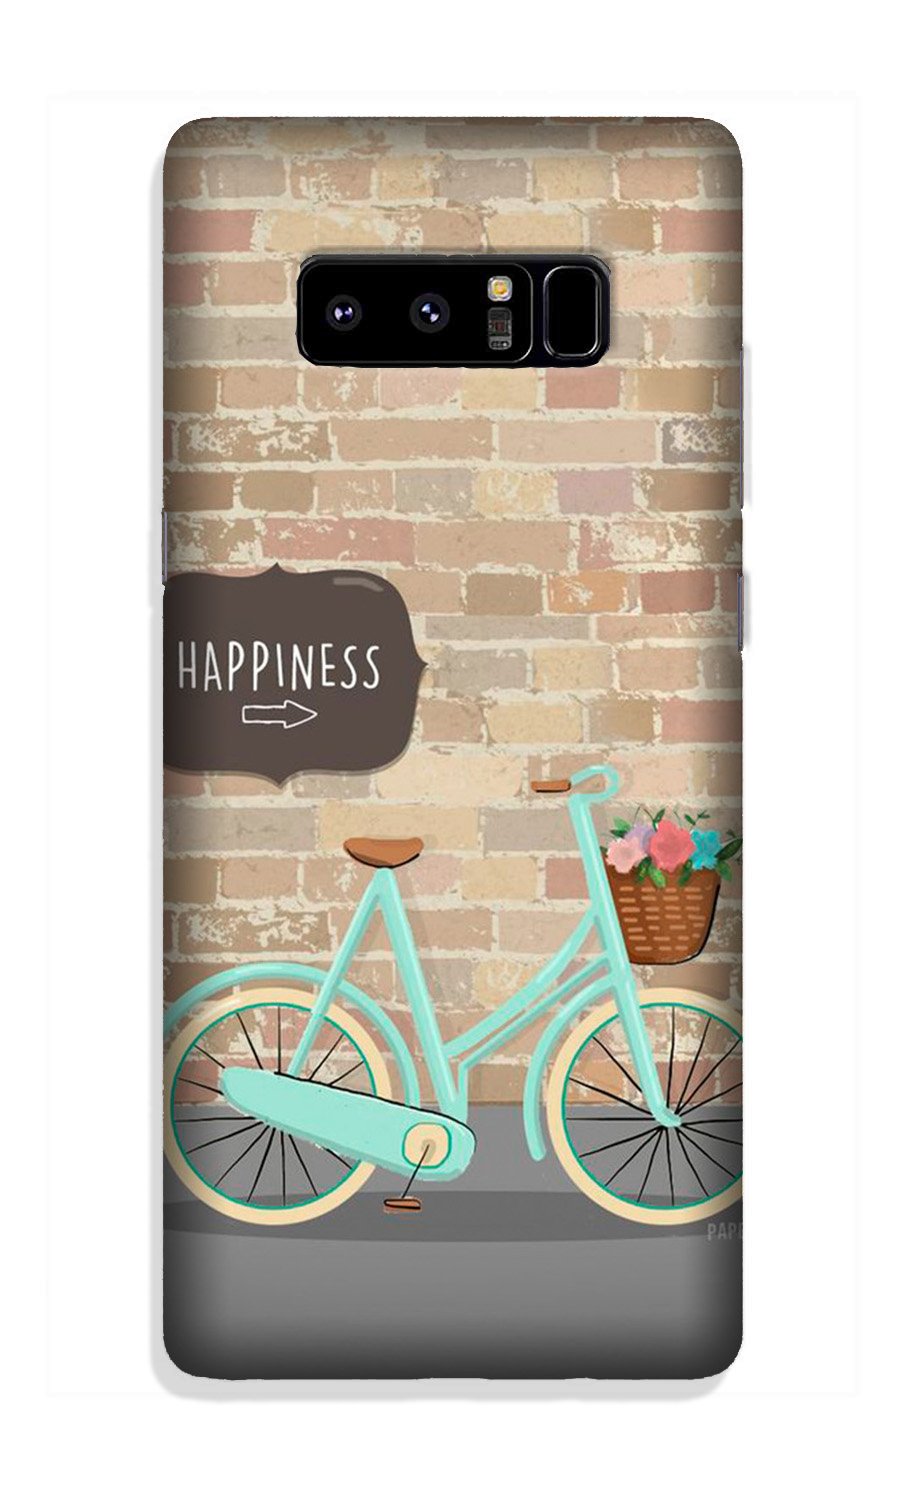 Happiness Case for Galaxy Note 8